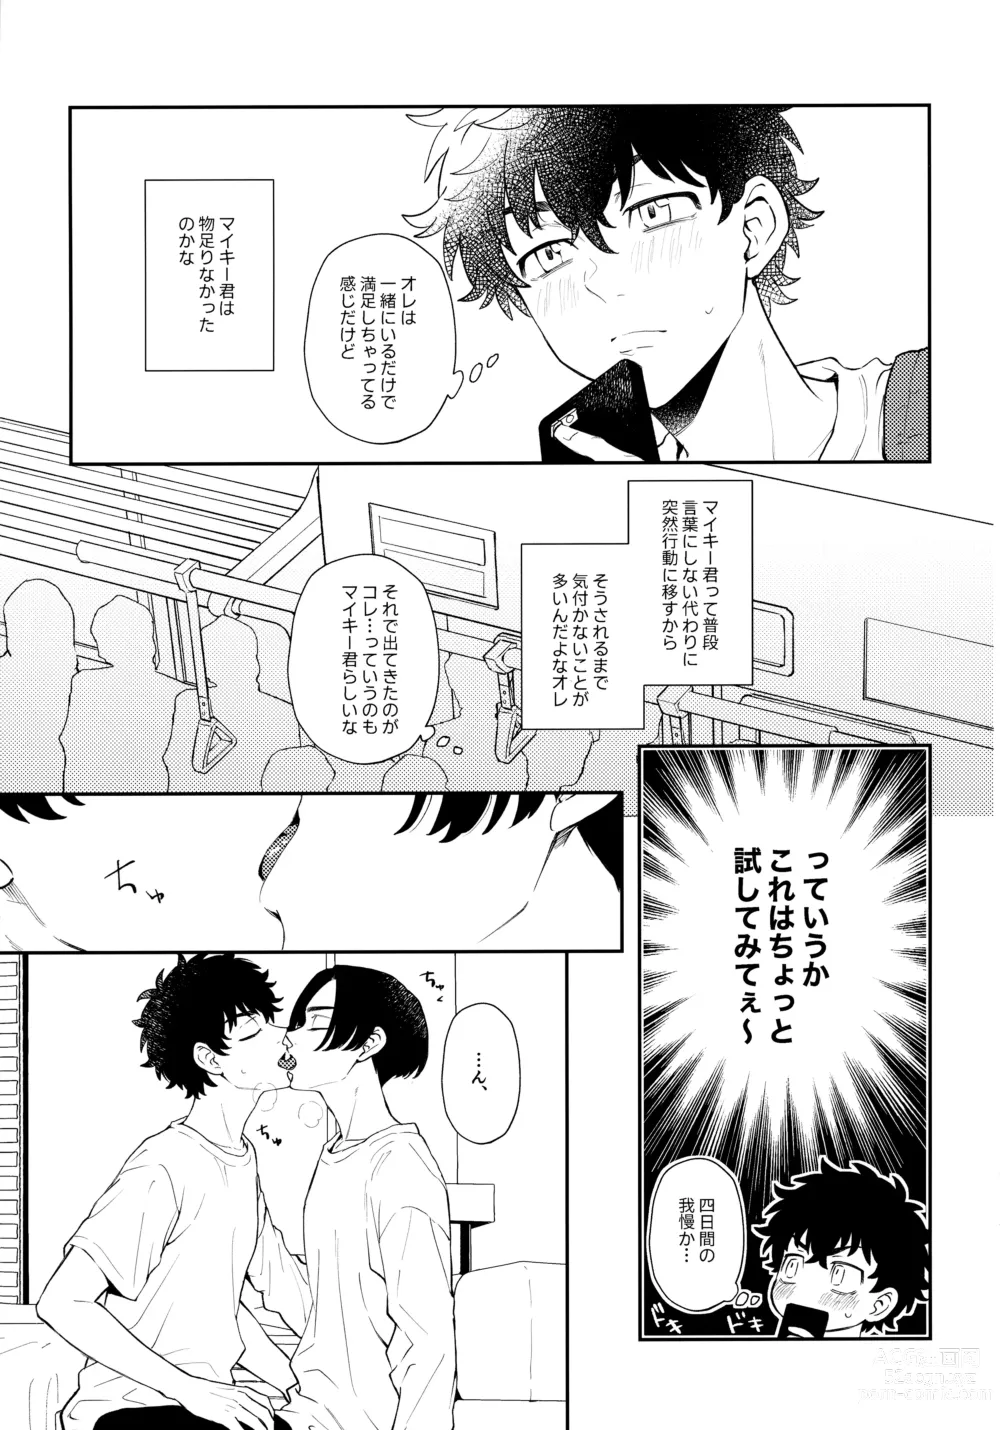 Page 8 of doujinshi Count 5